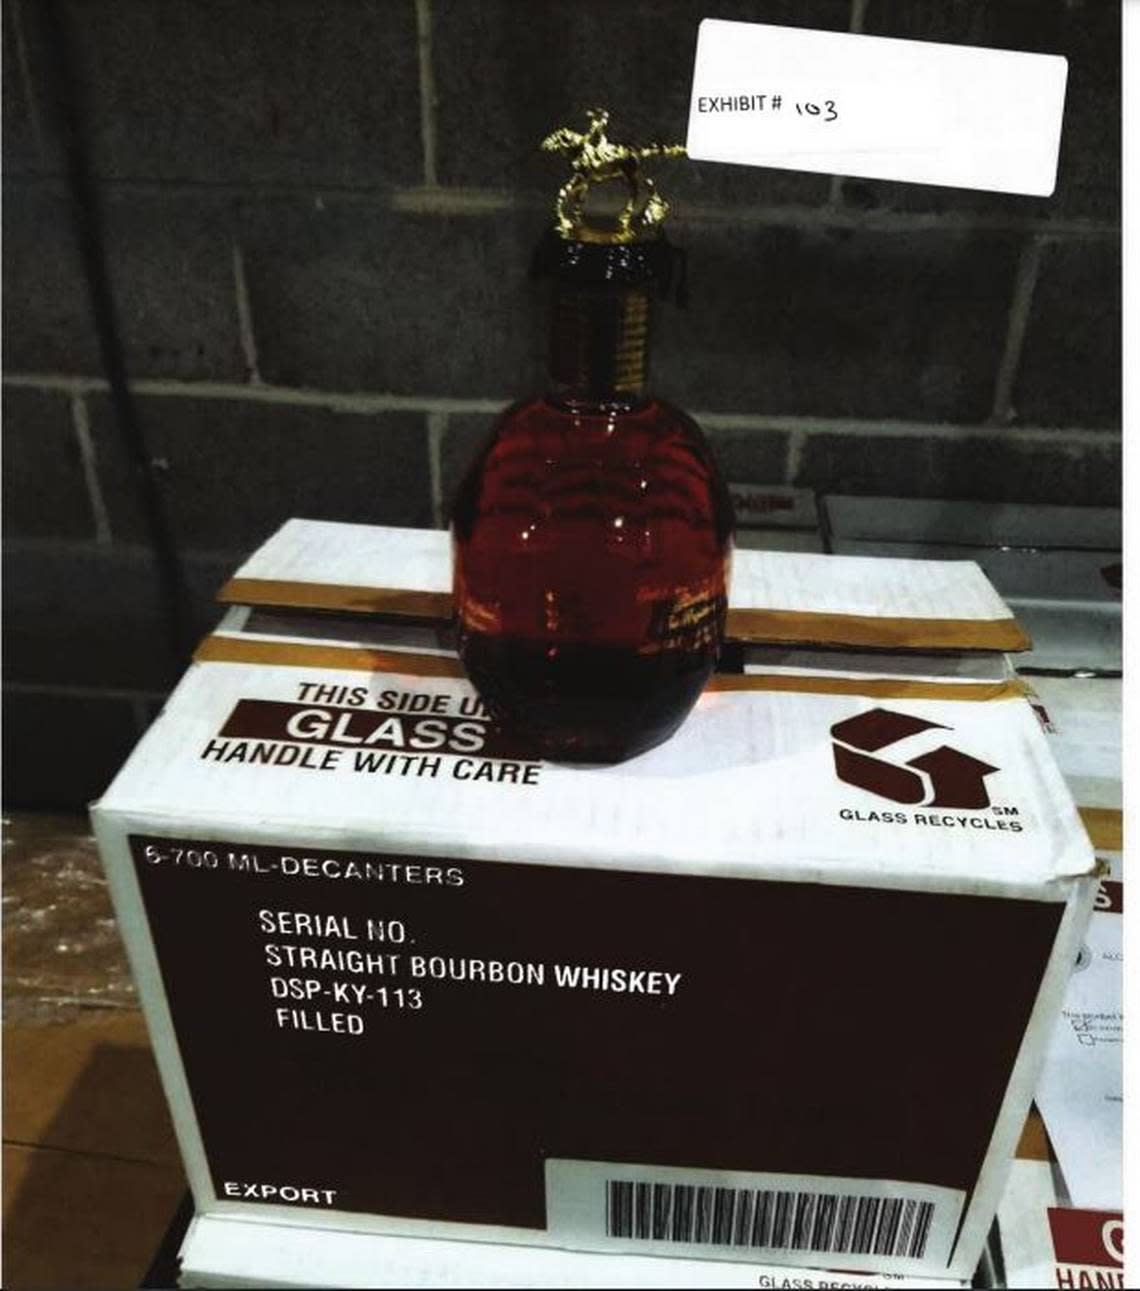 When investigators raided the Justins’ House of Bourbon warehouse in Washington, D.C., they “voluntarily detained” hundreds of bottles of Blanton’s and other bourbon pending further investigation.